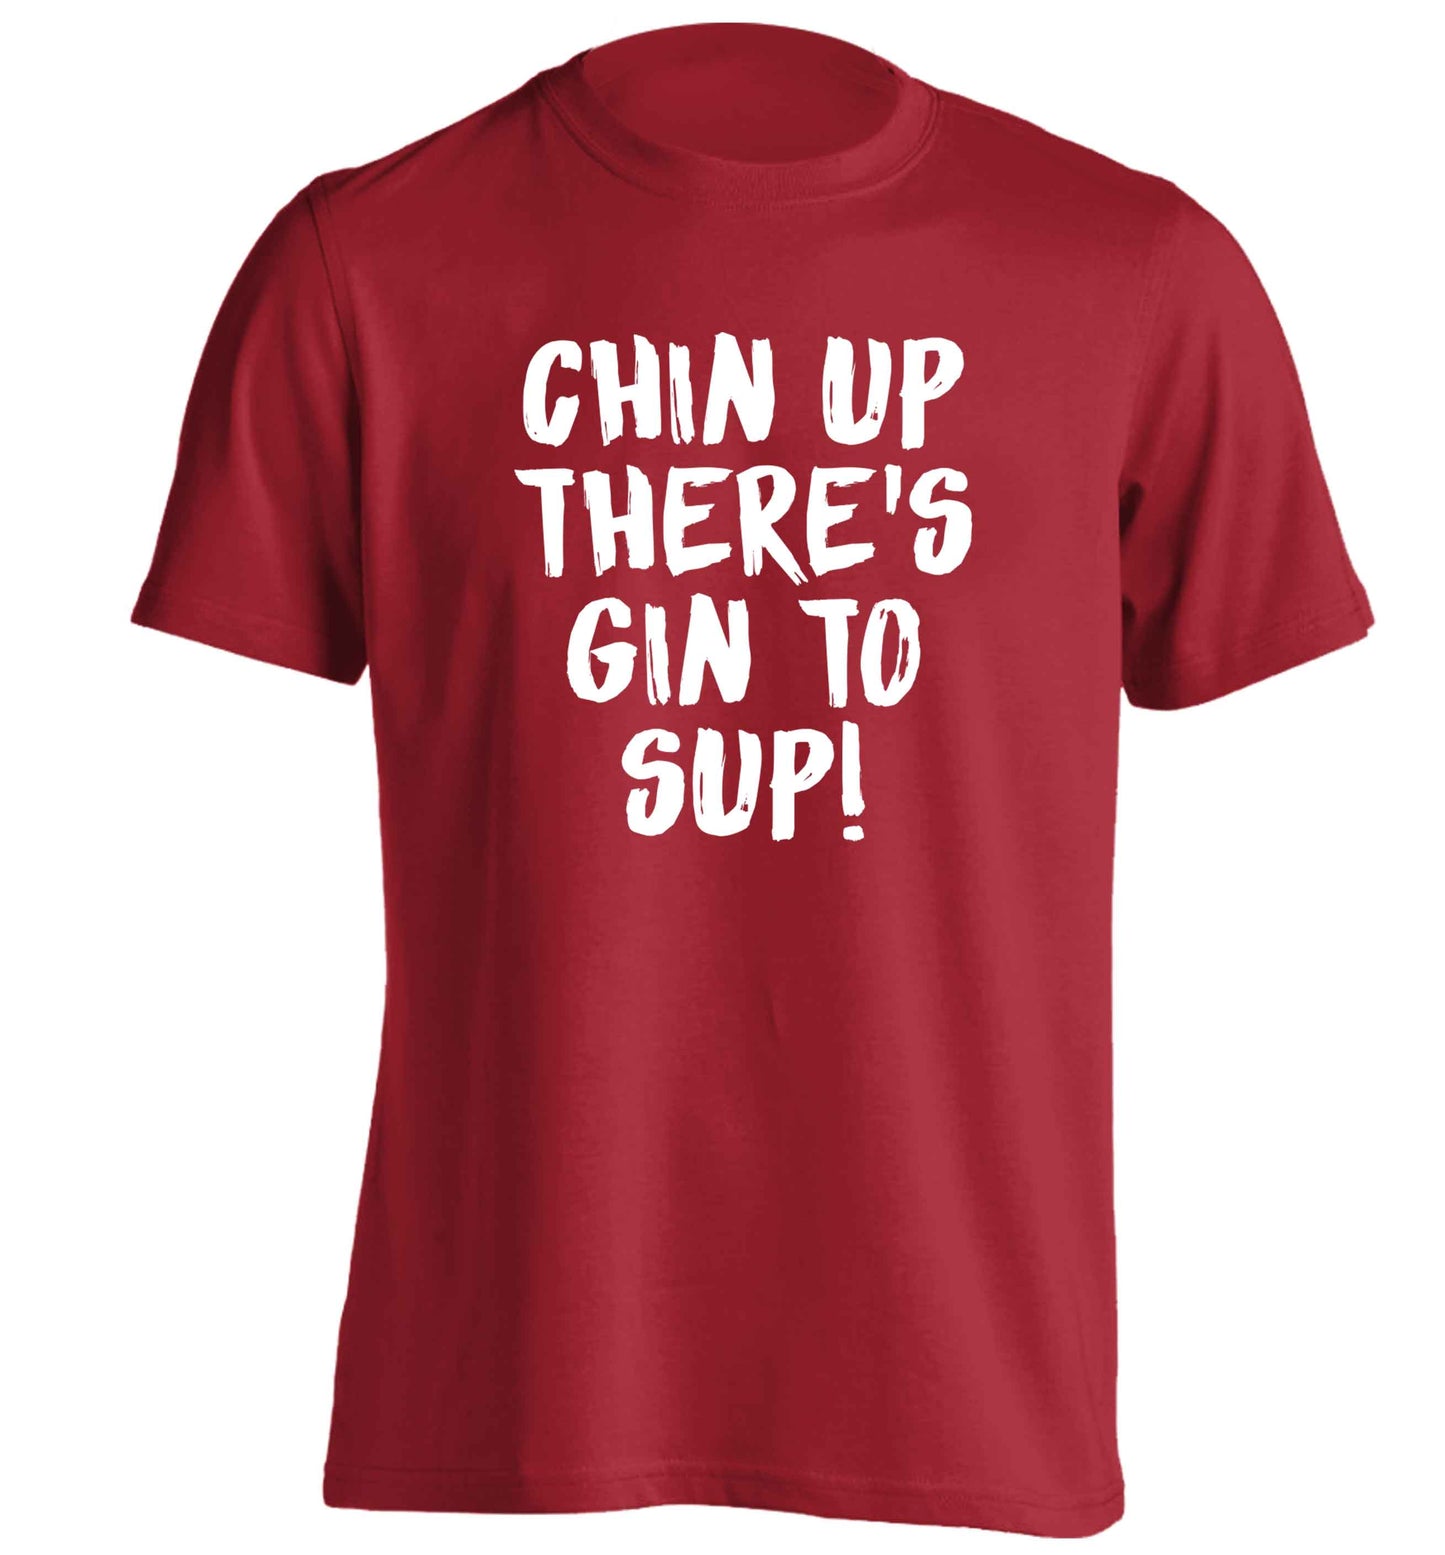 Chin up there's gin to sup adults unisex red Tshirt 2XL